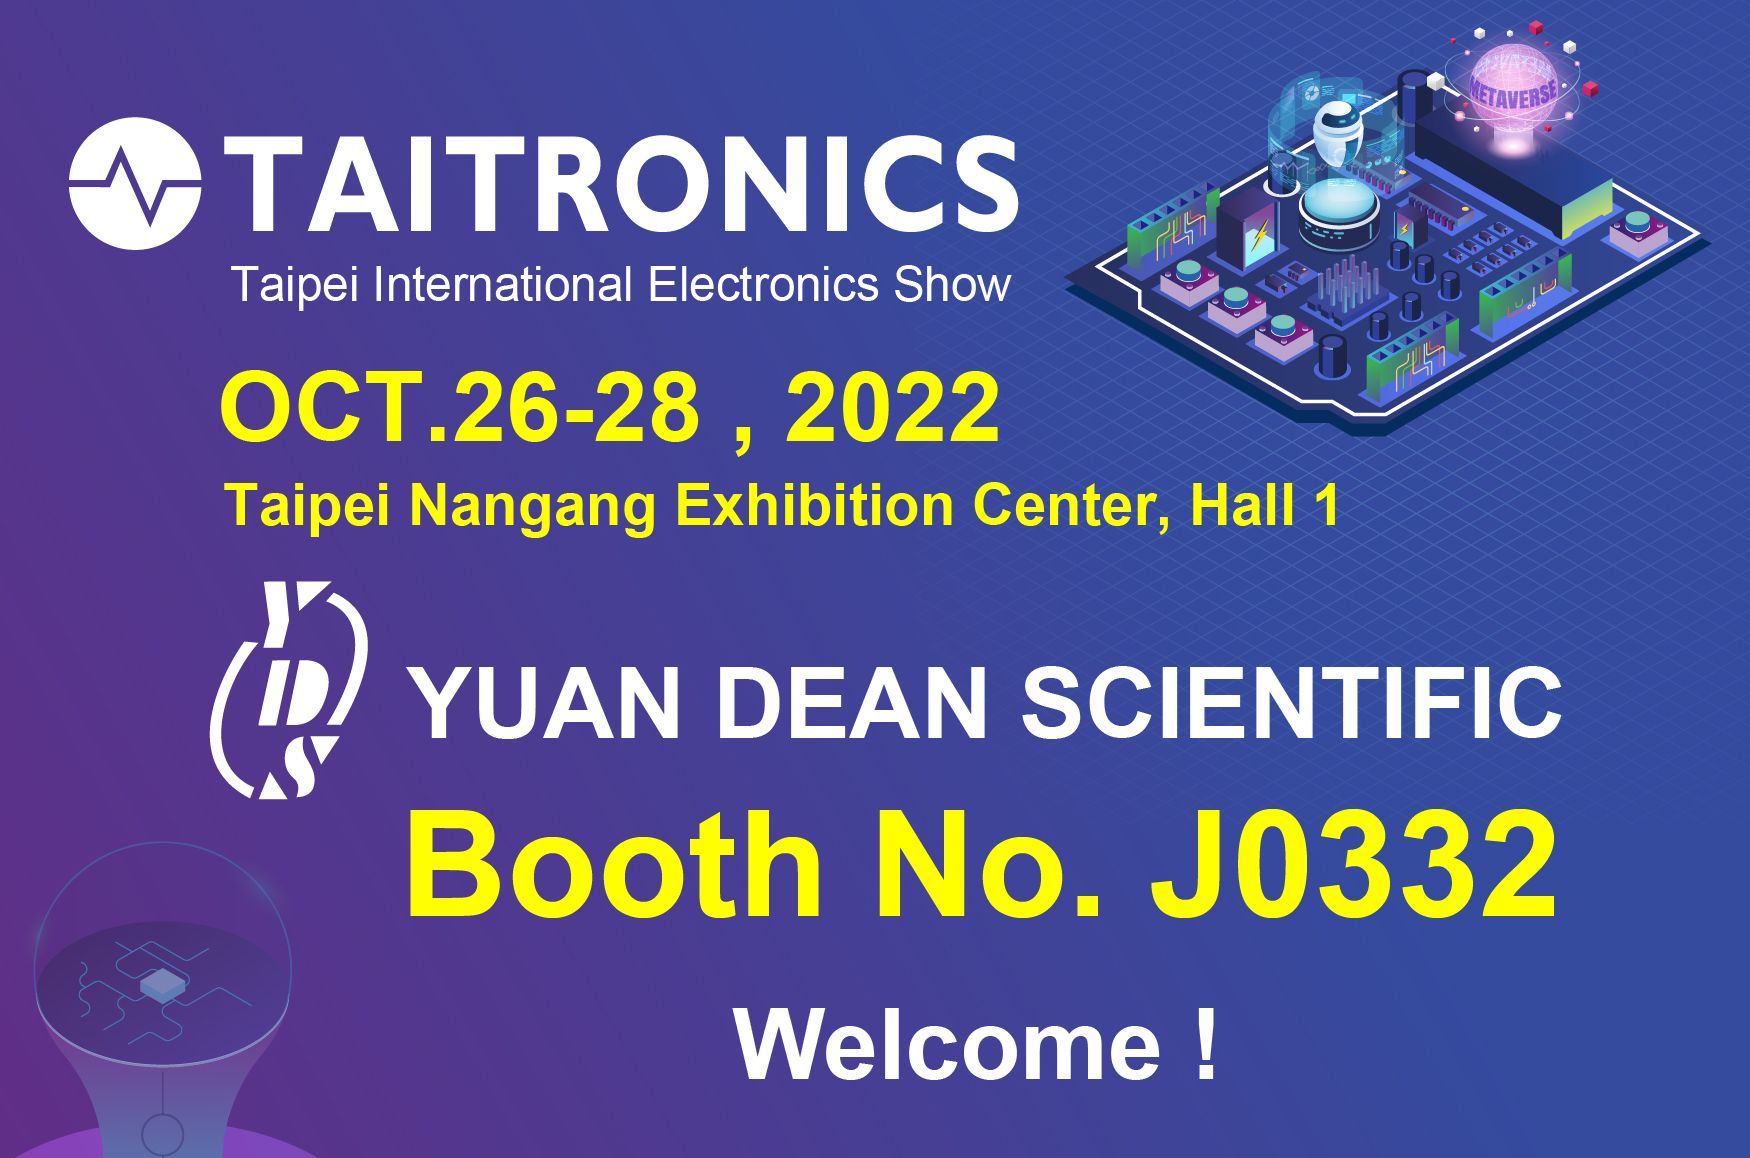 2022 TAITRONICS-welcome to visit Yuan Dean's booth- J0332